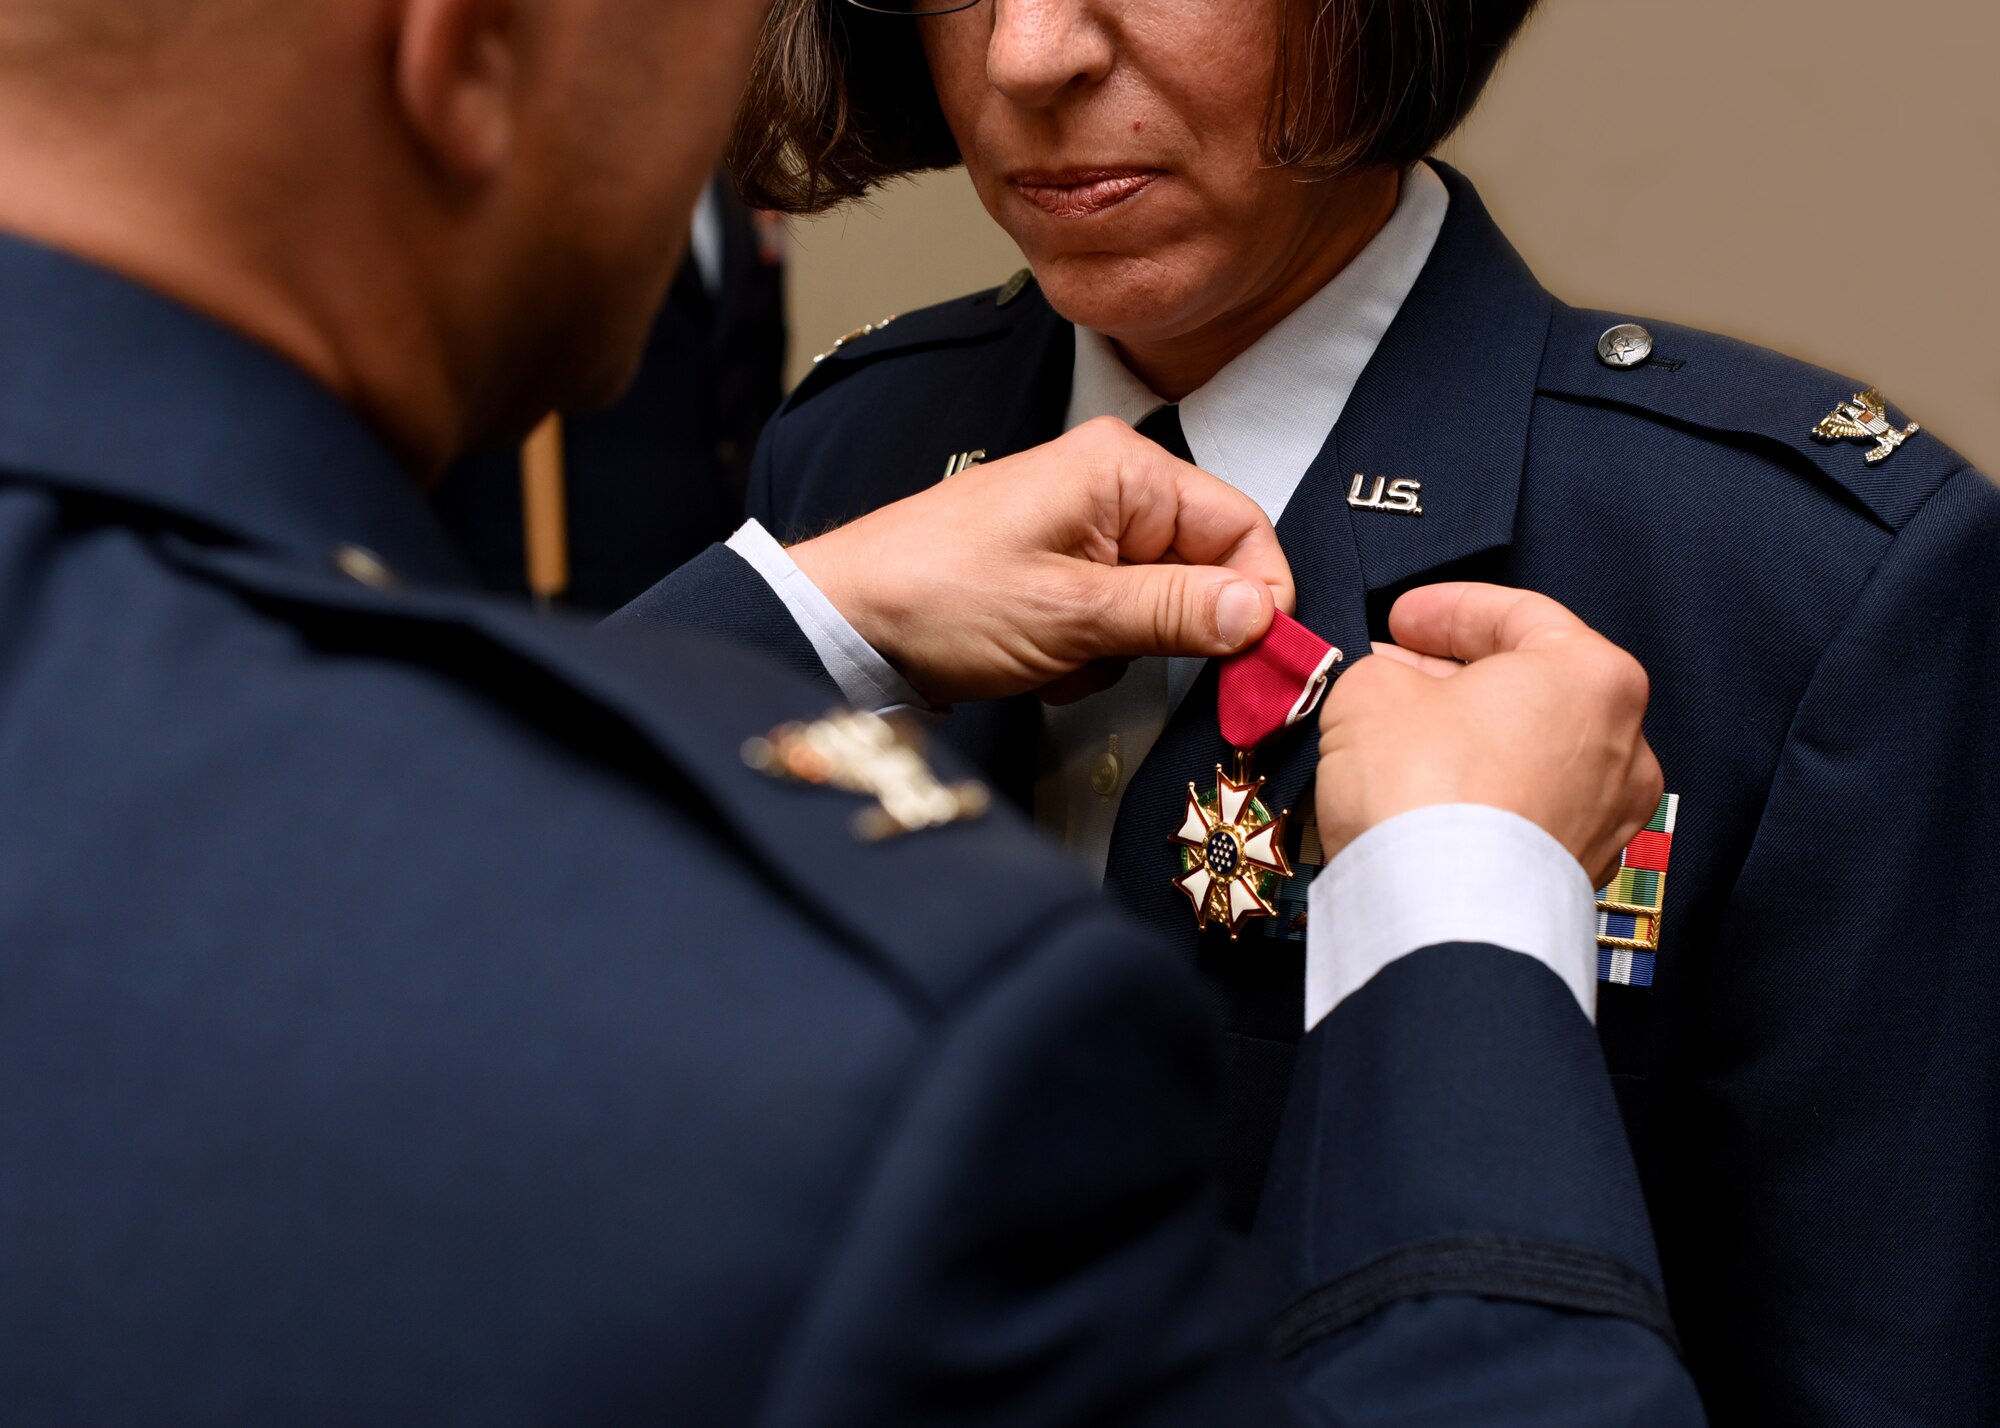 U.S. Air Force Col. Andres Nazario, 17th Training Wing commander, pins Col. Janet Urbanski, 17th Medical Group outgoing commander, with the Legion of Merit medal for her accomplishments as commander during the 17th MDG Change of Command Ceremony held at the event center on Goodfellow Air Force Base, Texas, July 8, 2019. Urbanski was awarded the accolade for praiseworthy service over the past two years at Goodfellow. (U.S. Air Force photo by Airman 1st Class Abbey Rieves/Released)